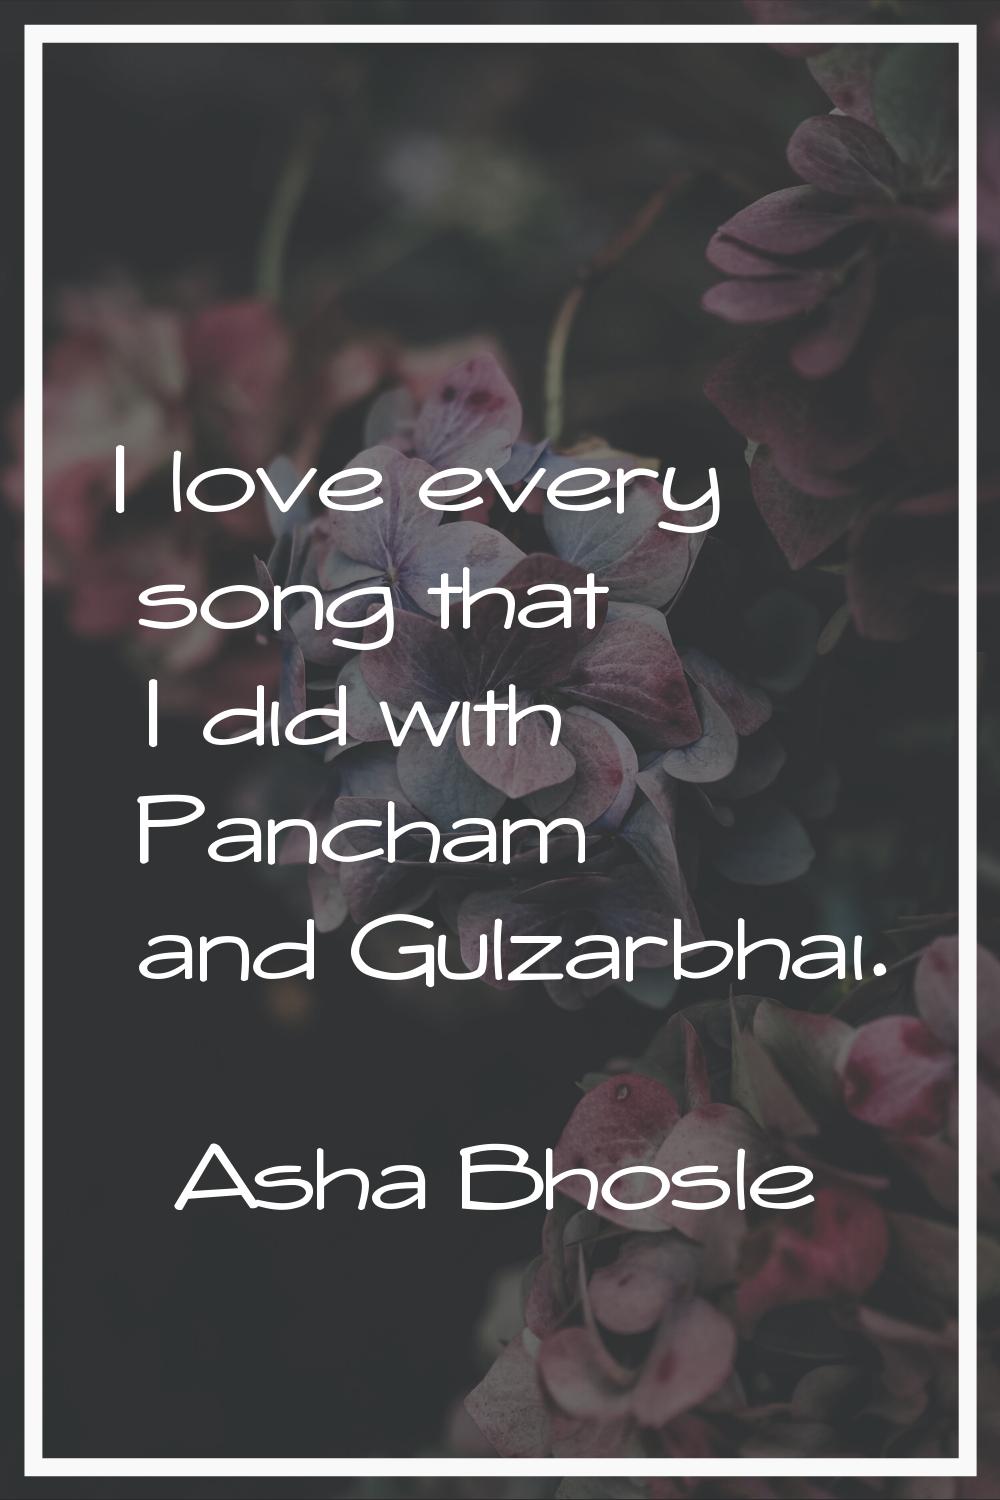 I love every song that I did with Pancham and Gulzarbhai.